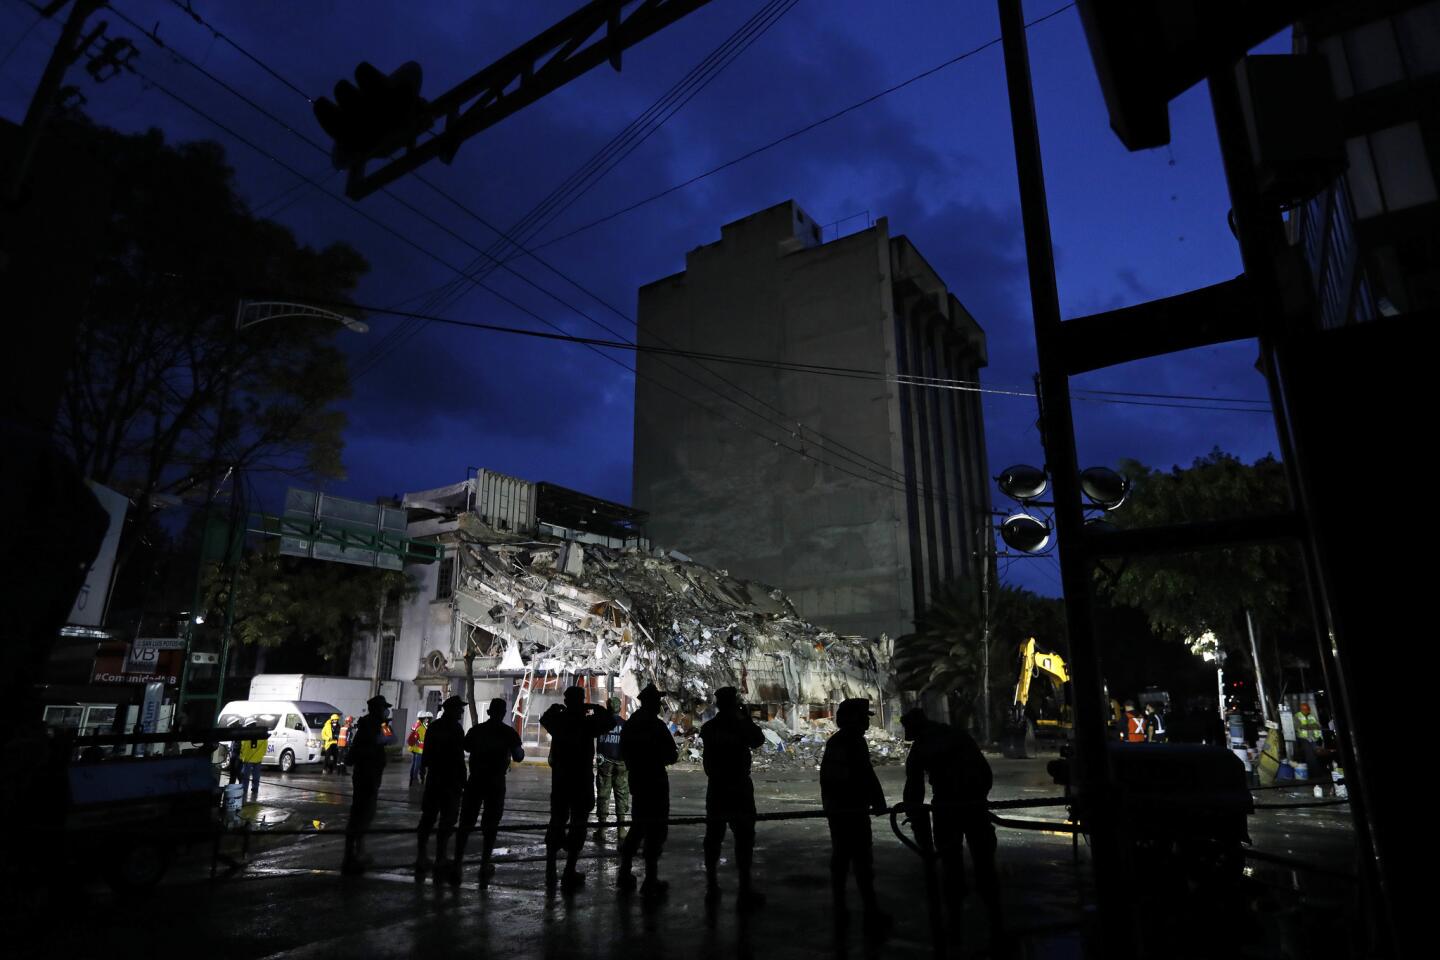 Over 200 buildings damaged in Mexico quake that killed 2: Official